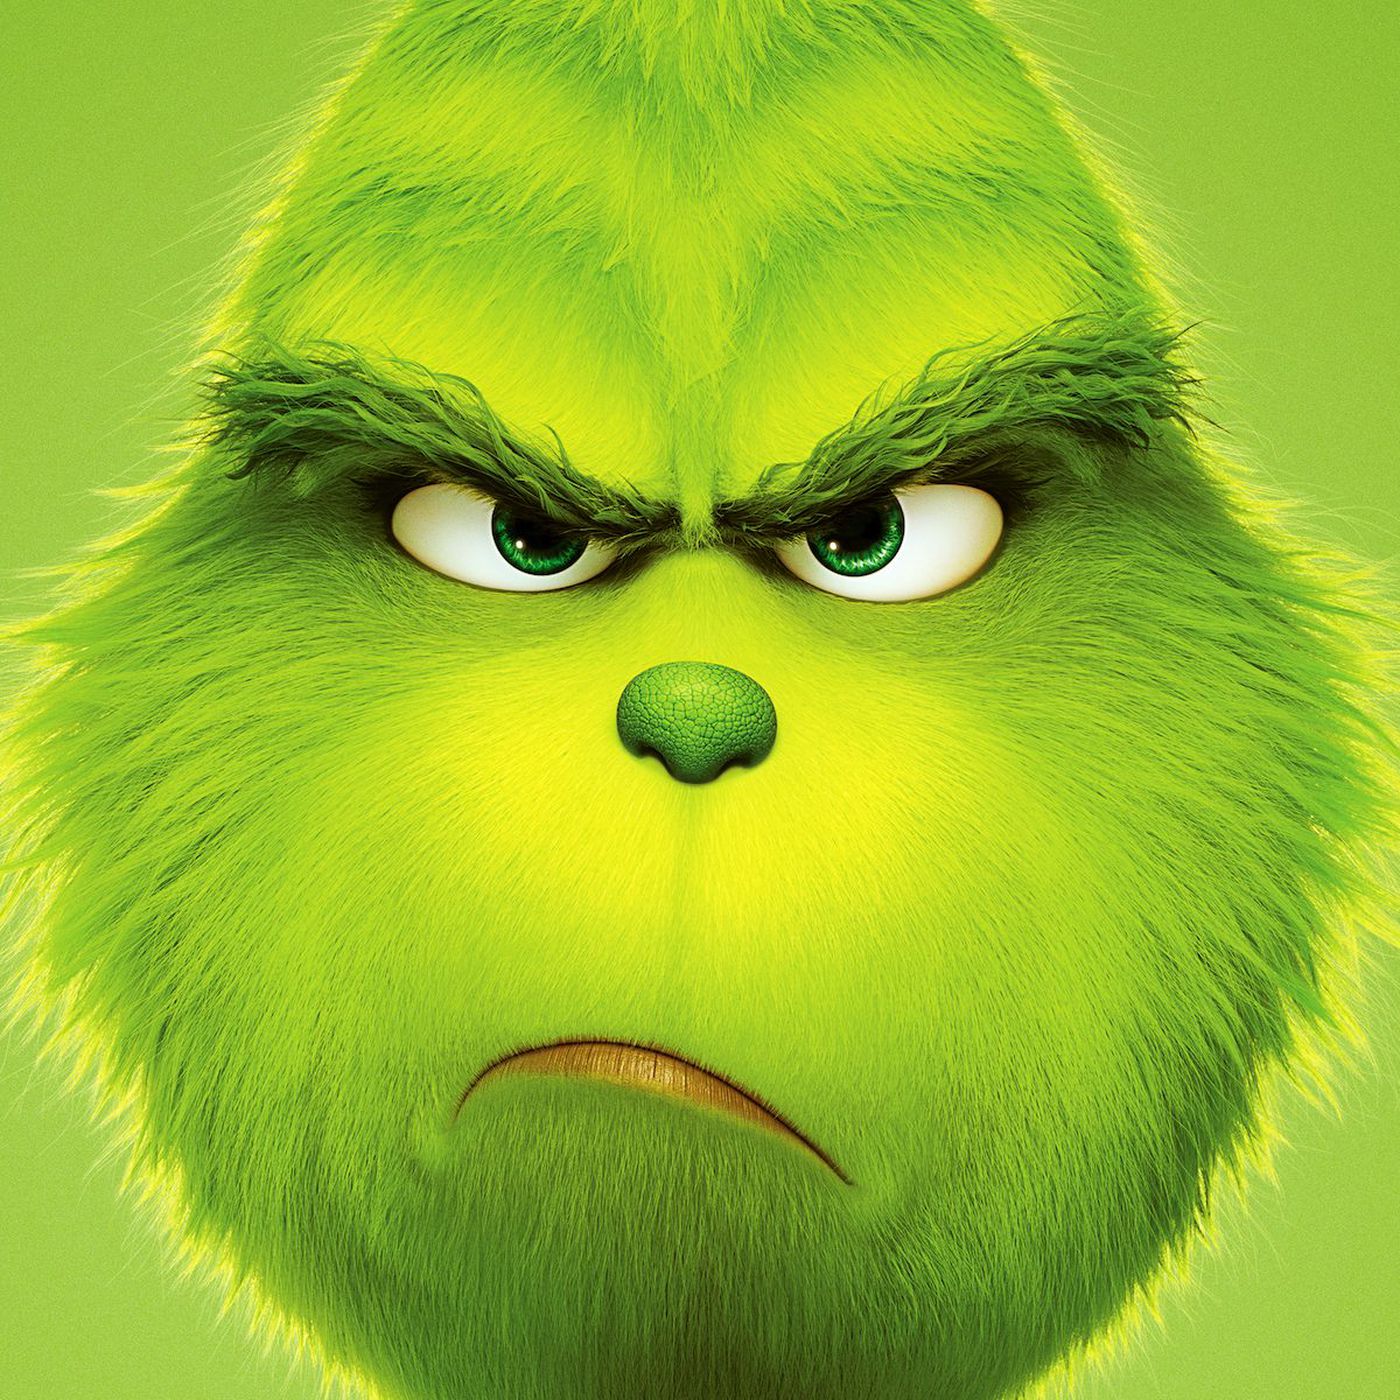 The Grinch!